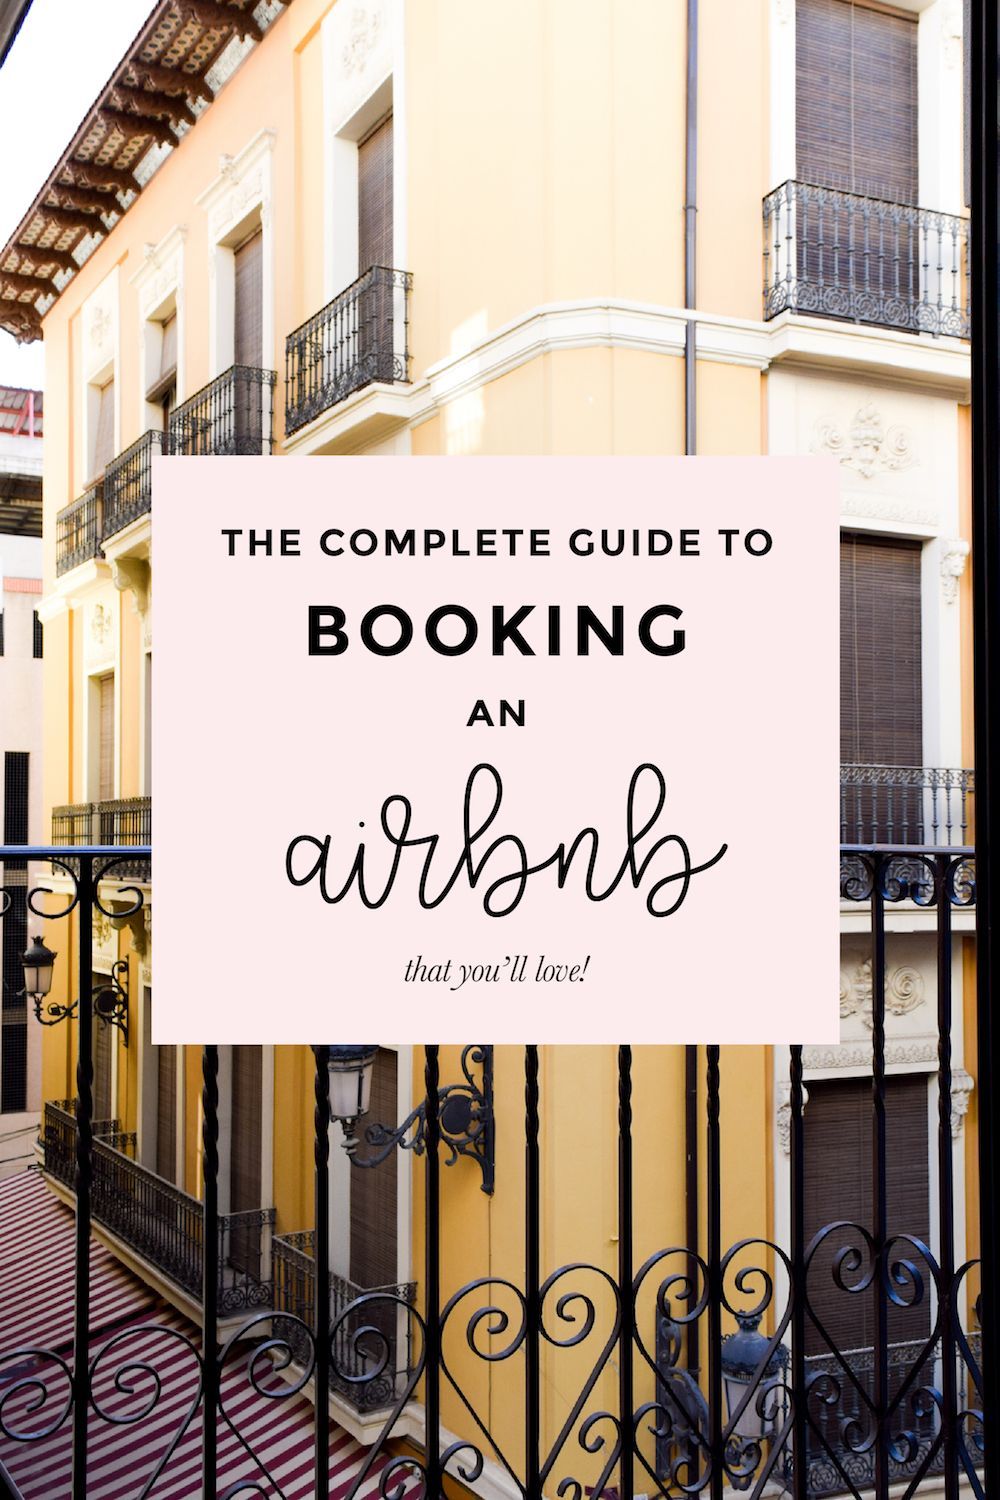 The Complete Guide to Booking an Airbnb